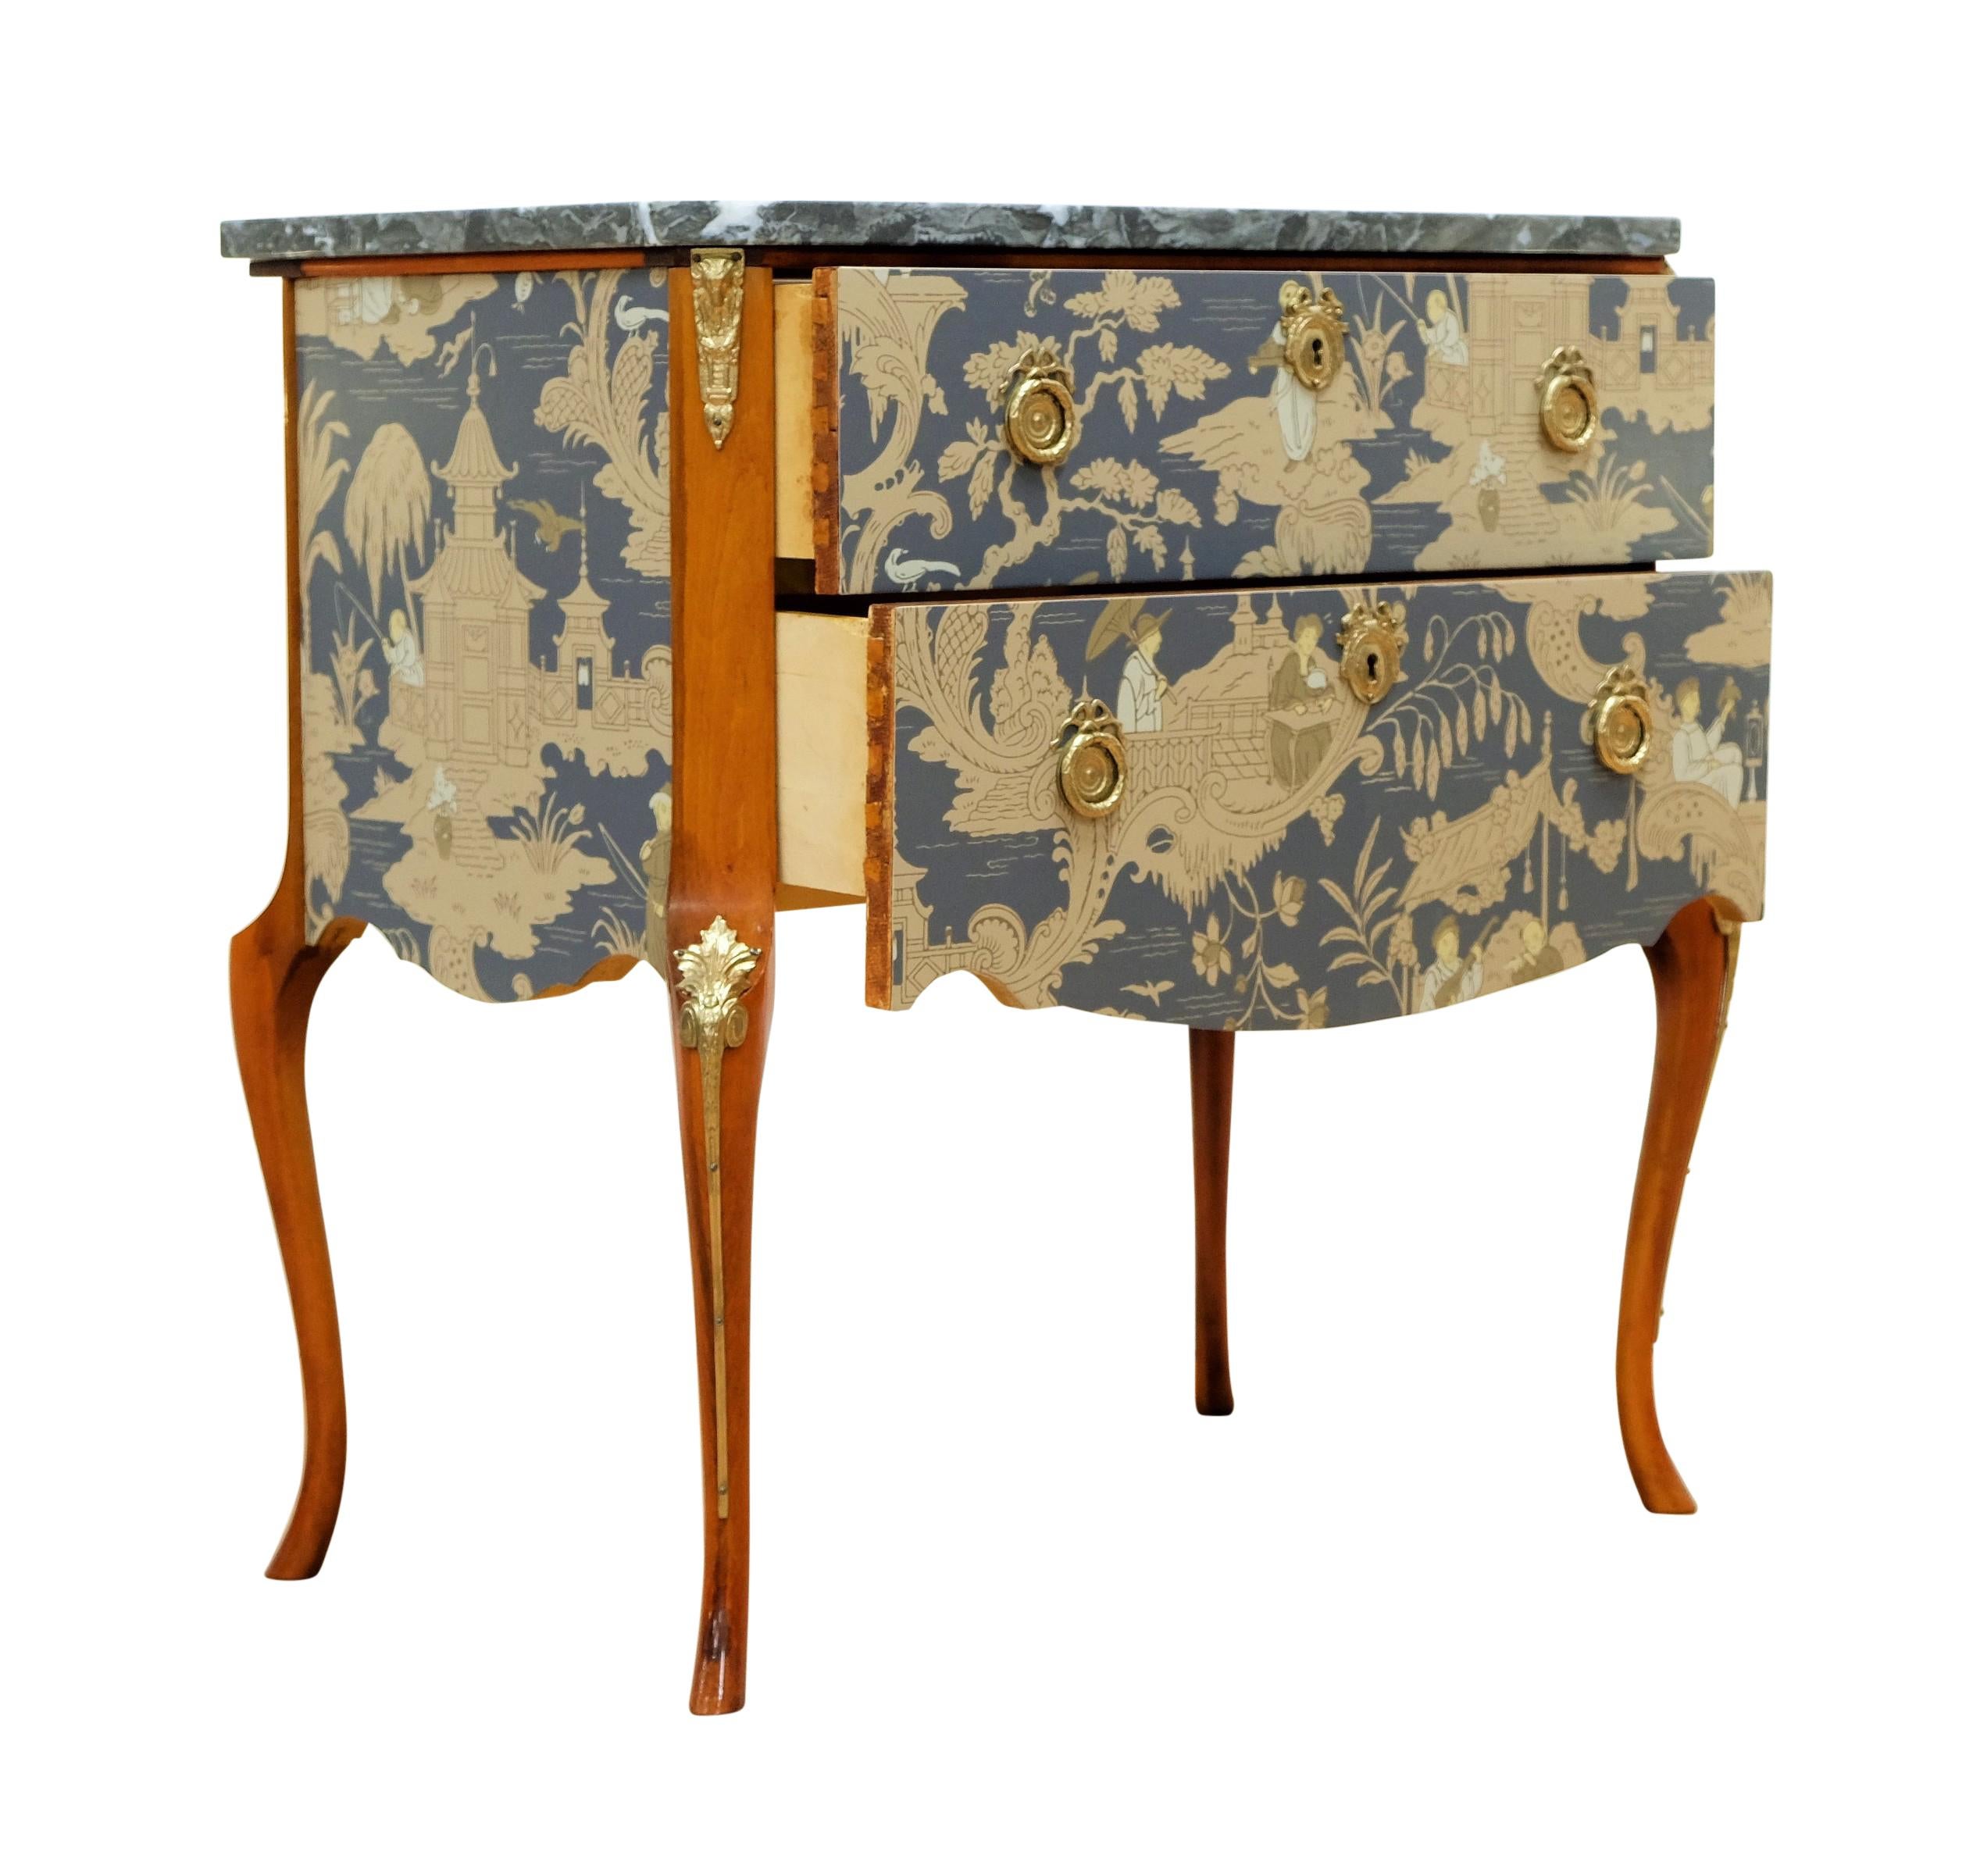 Gustavian Style Commode with natural marble top and Chinoiserie Design Fine original fittings in solid brass. 

Width: 70cm / 27.6